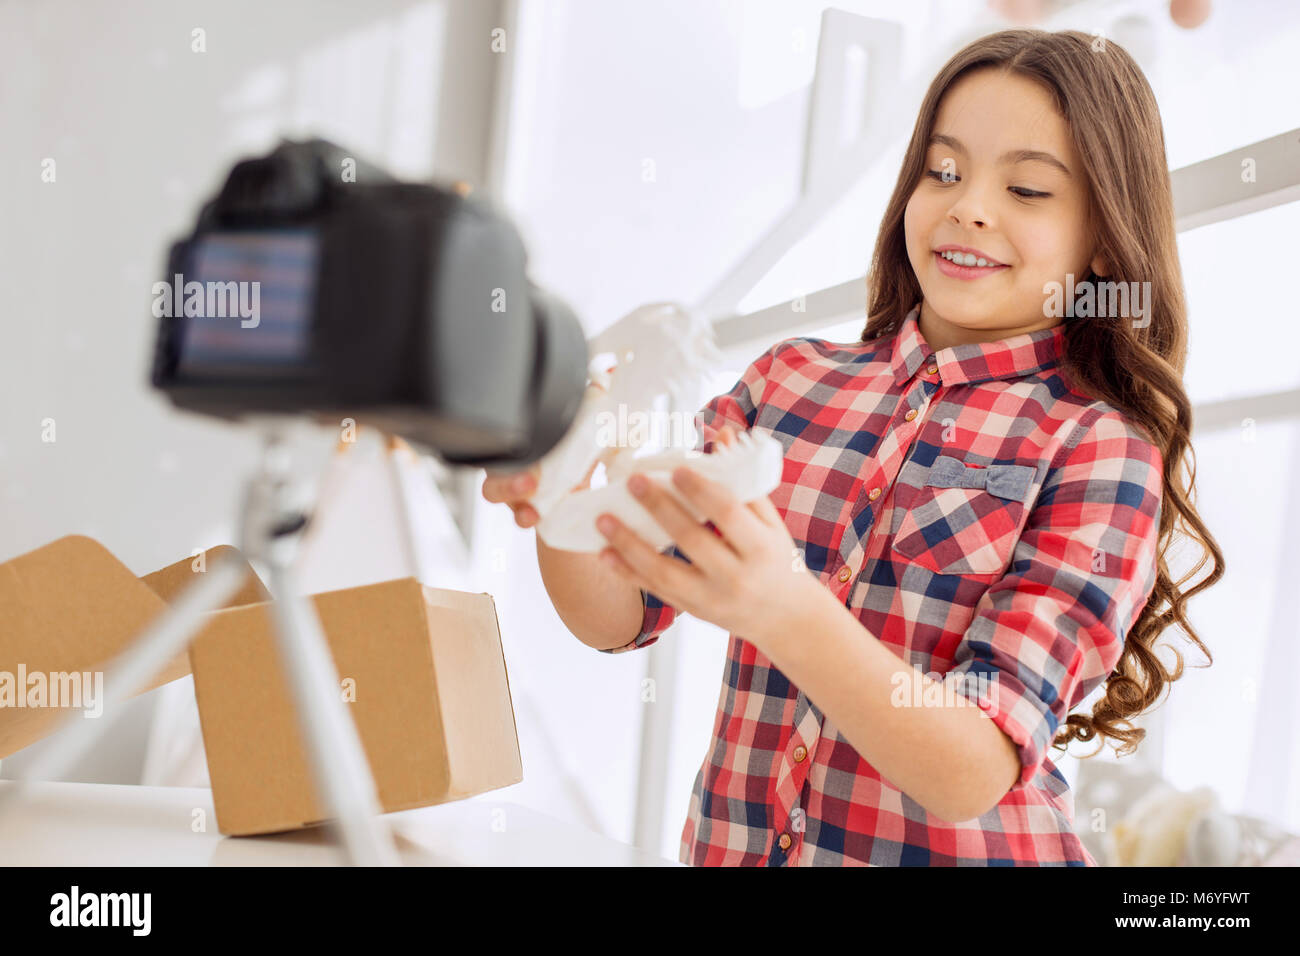 Cheerful video blogger showing her new toy to her audience Stock Photo